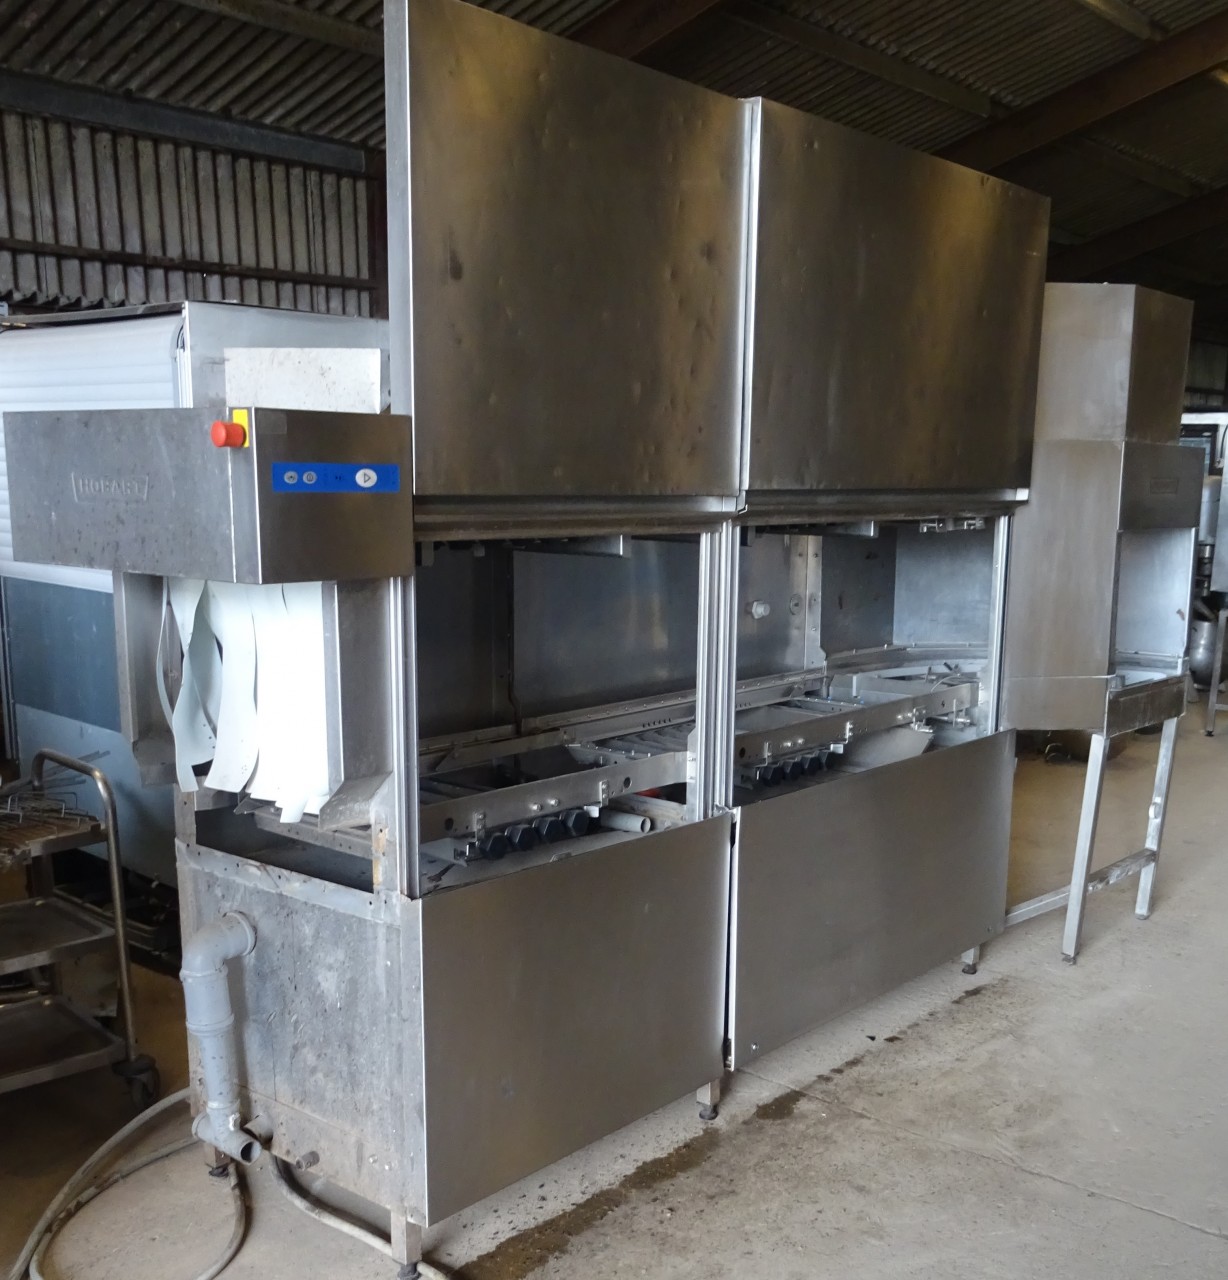 HOBART CN Series Conveyor Dish Washer with Dryer